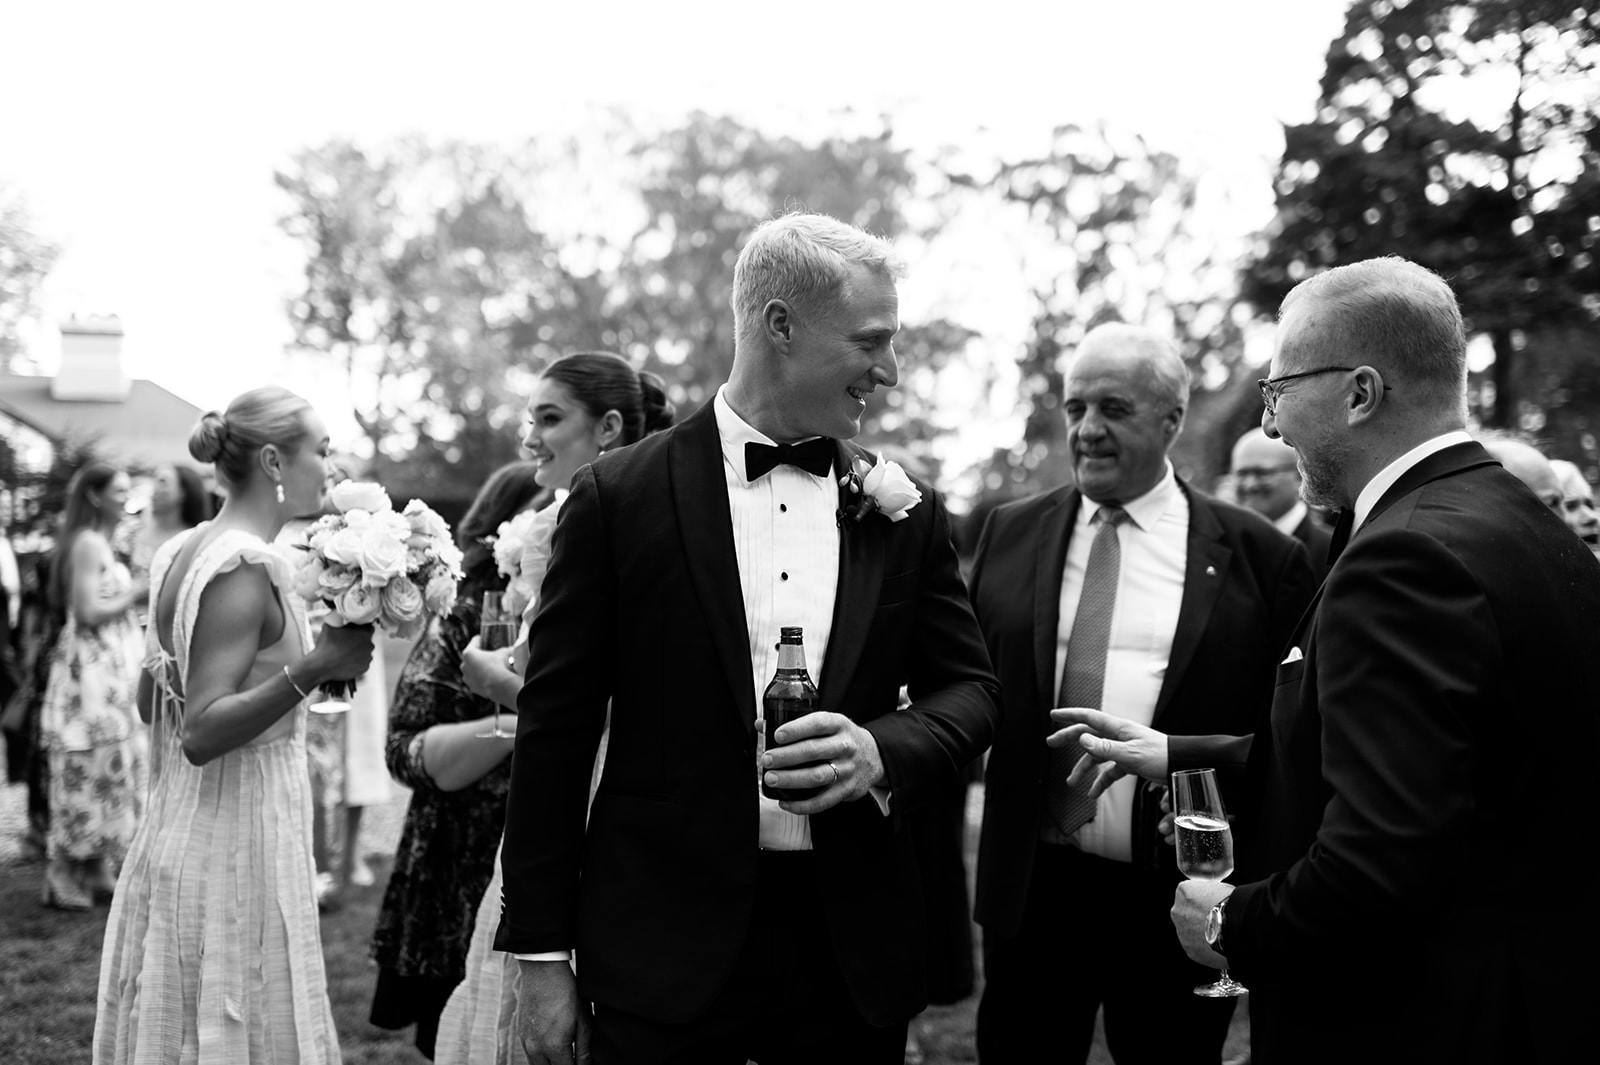 Black and white photo of a group at an outdoor event. A man in a tuxedo holds a bottle, smiling at a man in a suit holding a glass. Behind them, women chat and hold flowers. Trees and other guests fill the background.